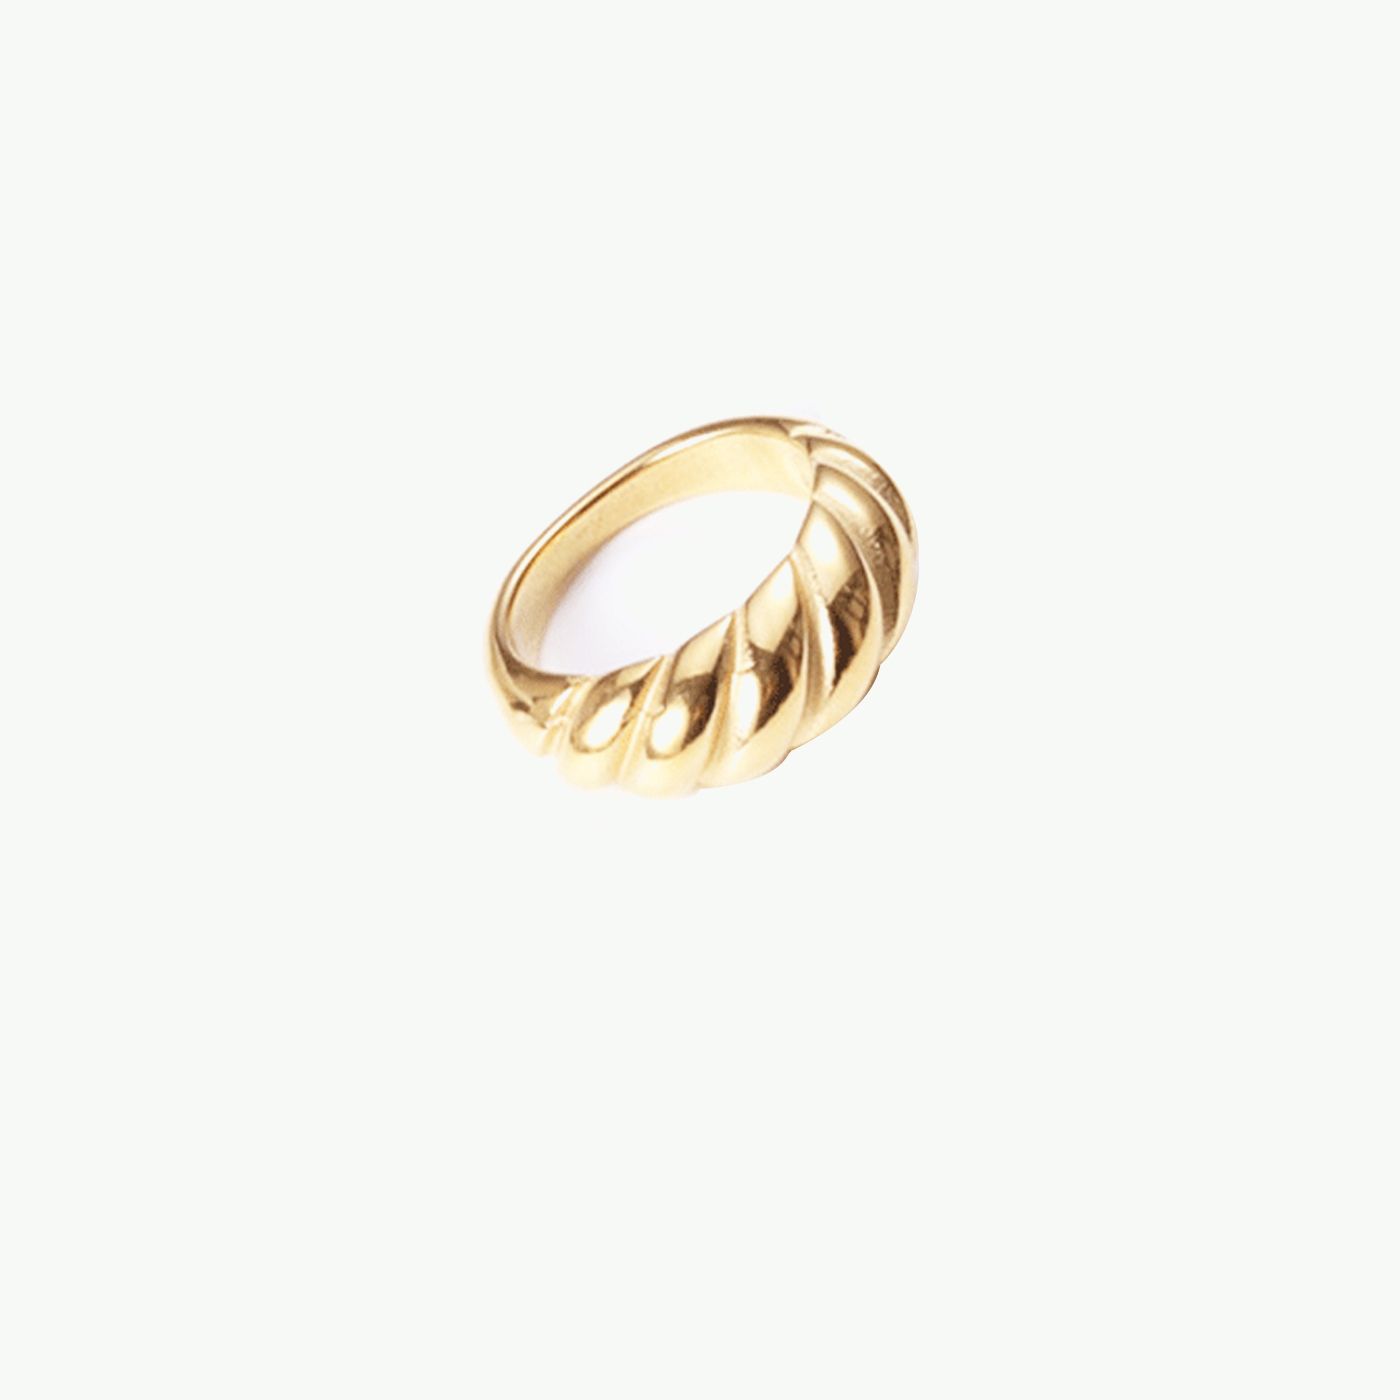 Nordic Muse Premium Gold Plated Stainless Steel Croissant Dome Ring - Trouva | Trouva (Global)